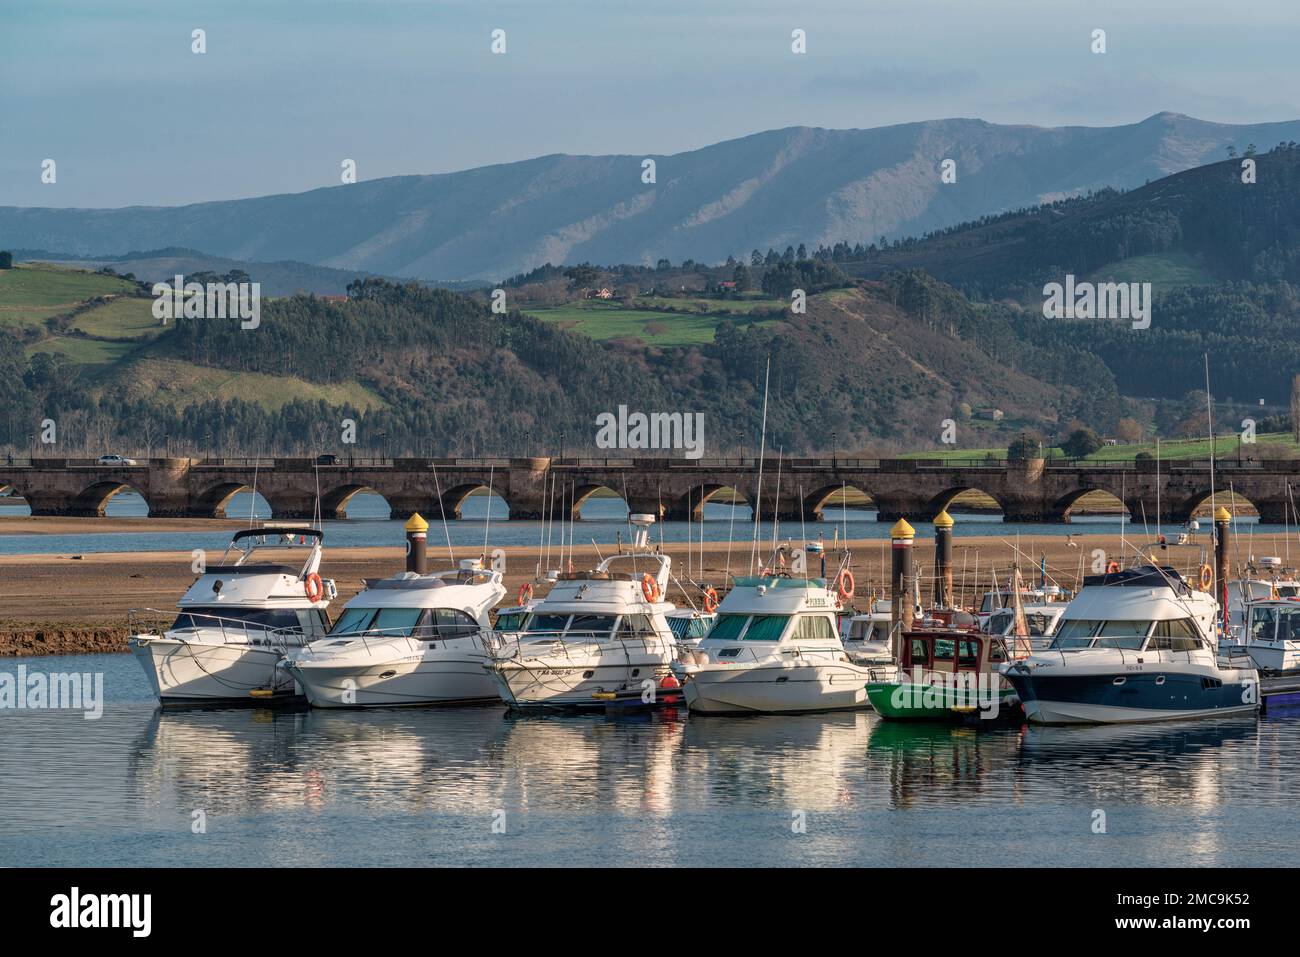 Sports boats and recreational yachts with the Maza bridge in the background in San Vicente de la Barquera, Cantabria, Spain Stock Photo